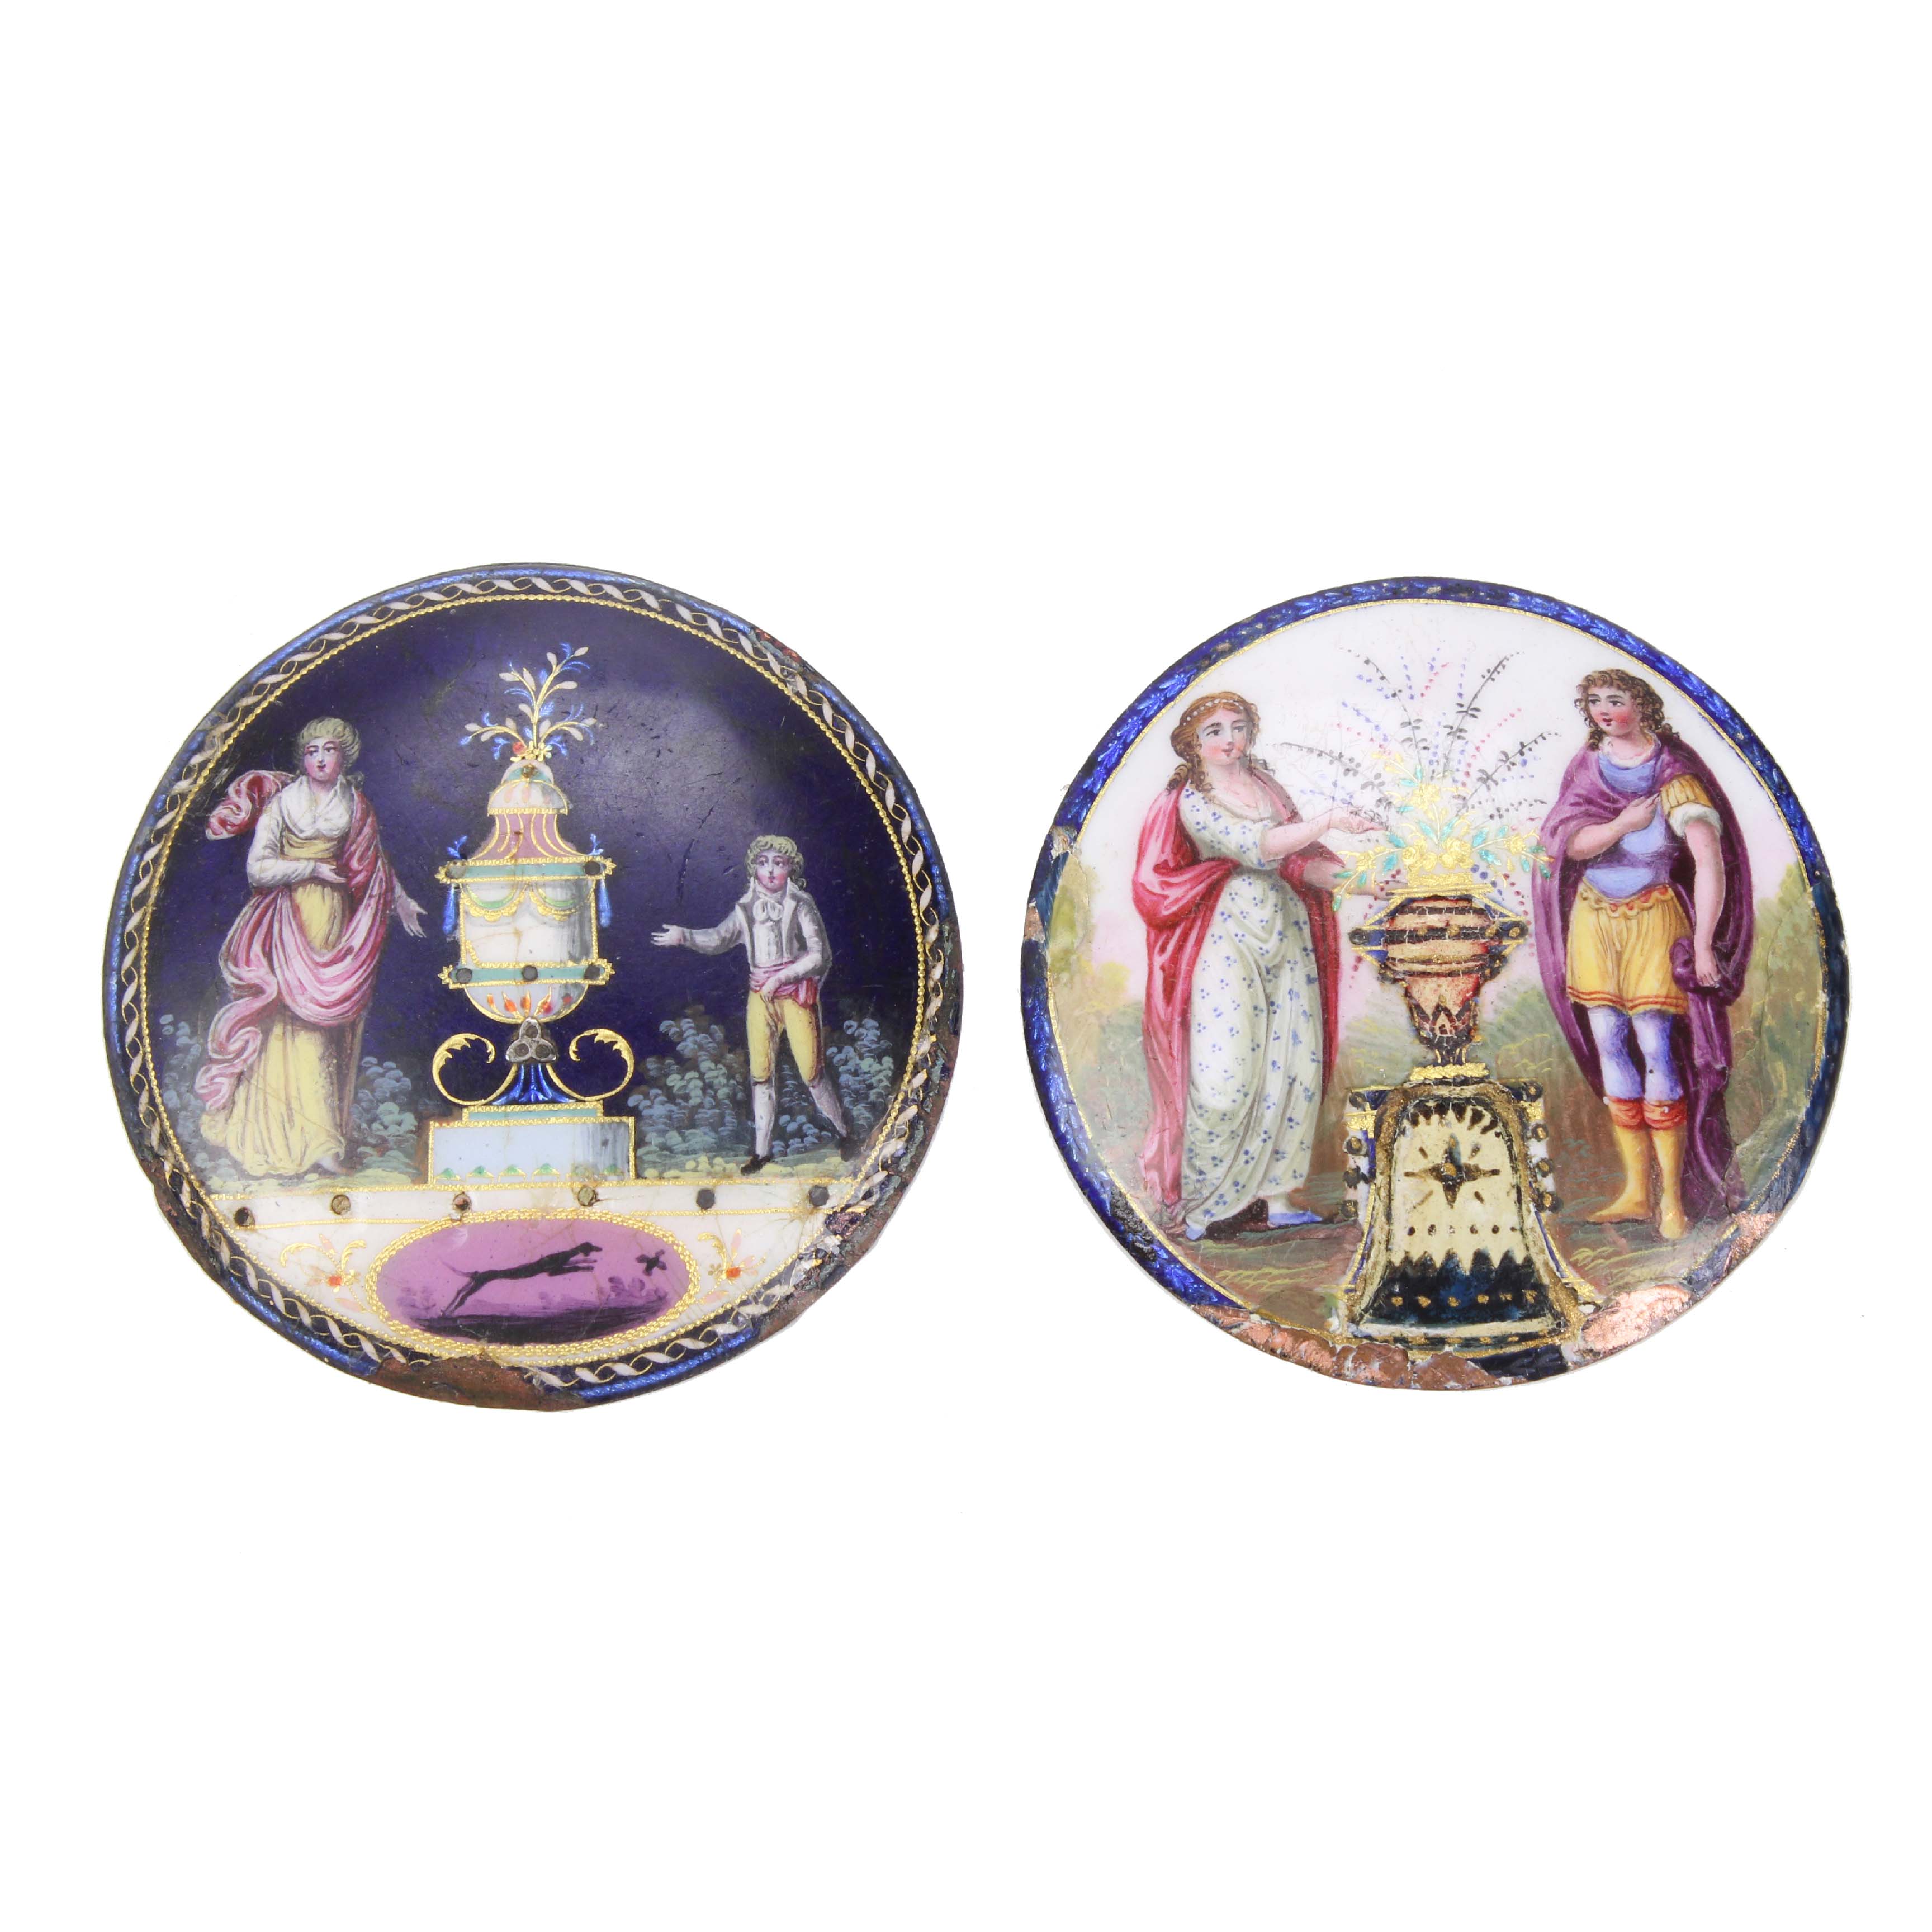 PAIR OF ENAMELS, PROBABLY ENGLISH, C18th.